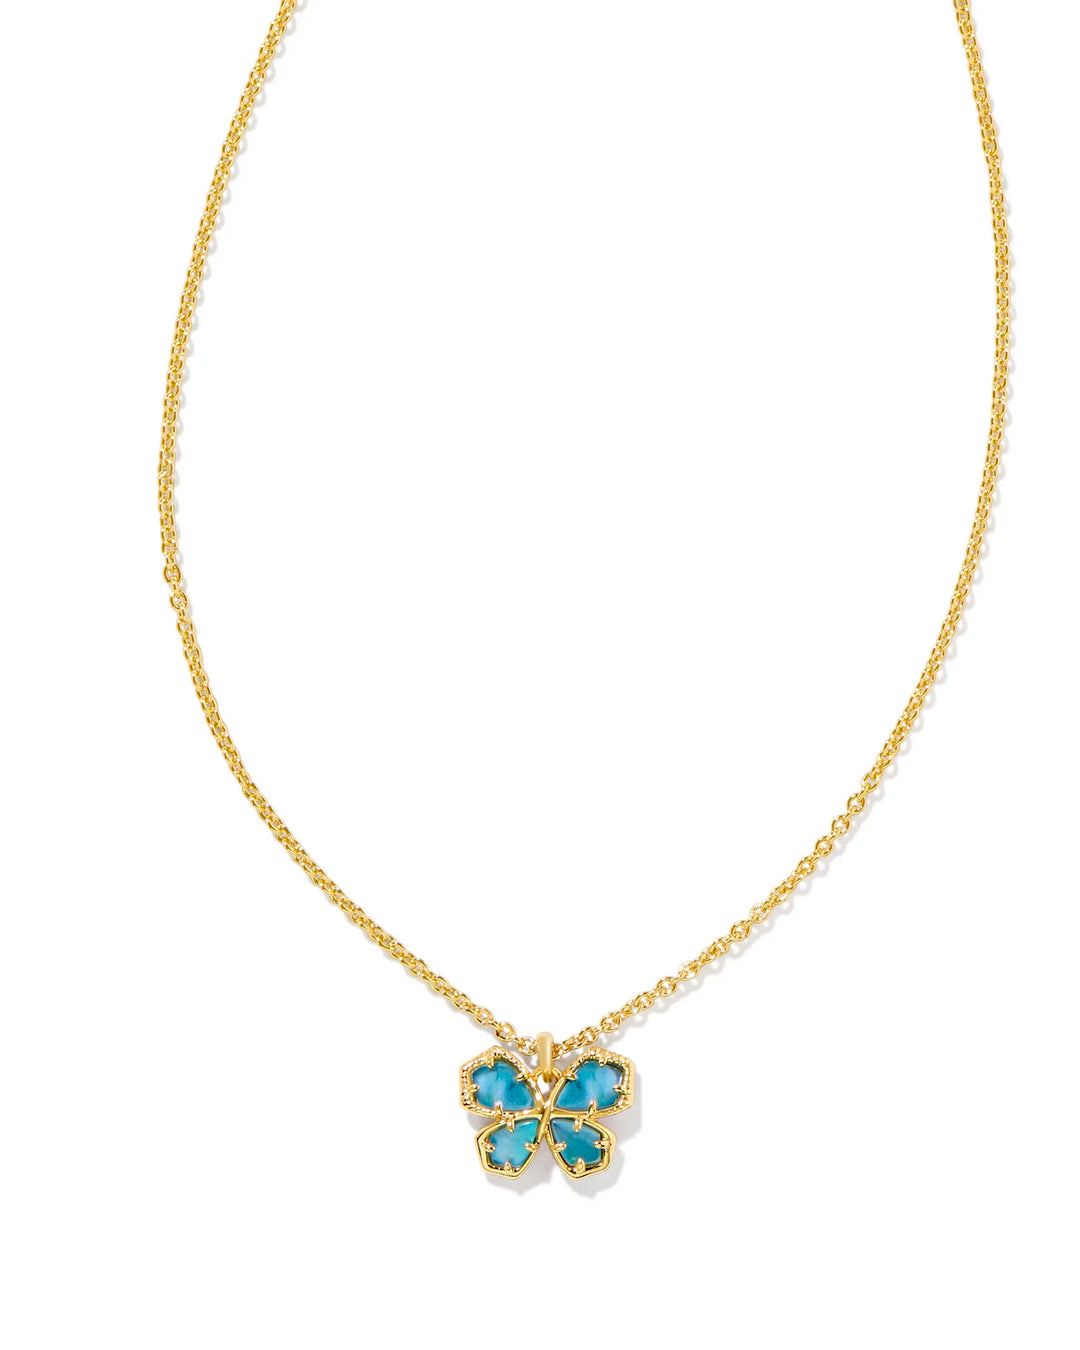 Kendra Scott Mae Butterfly Pendant Necklace in Indigo Watercolor in Gold